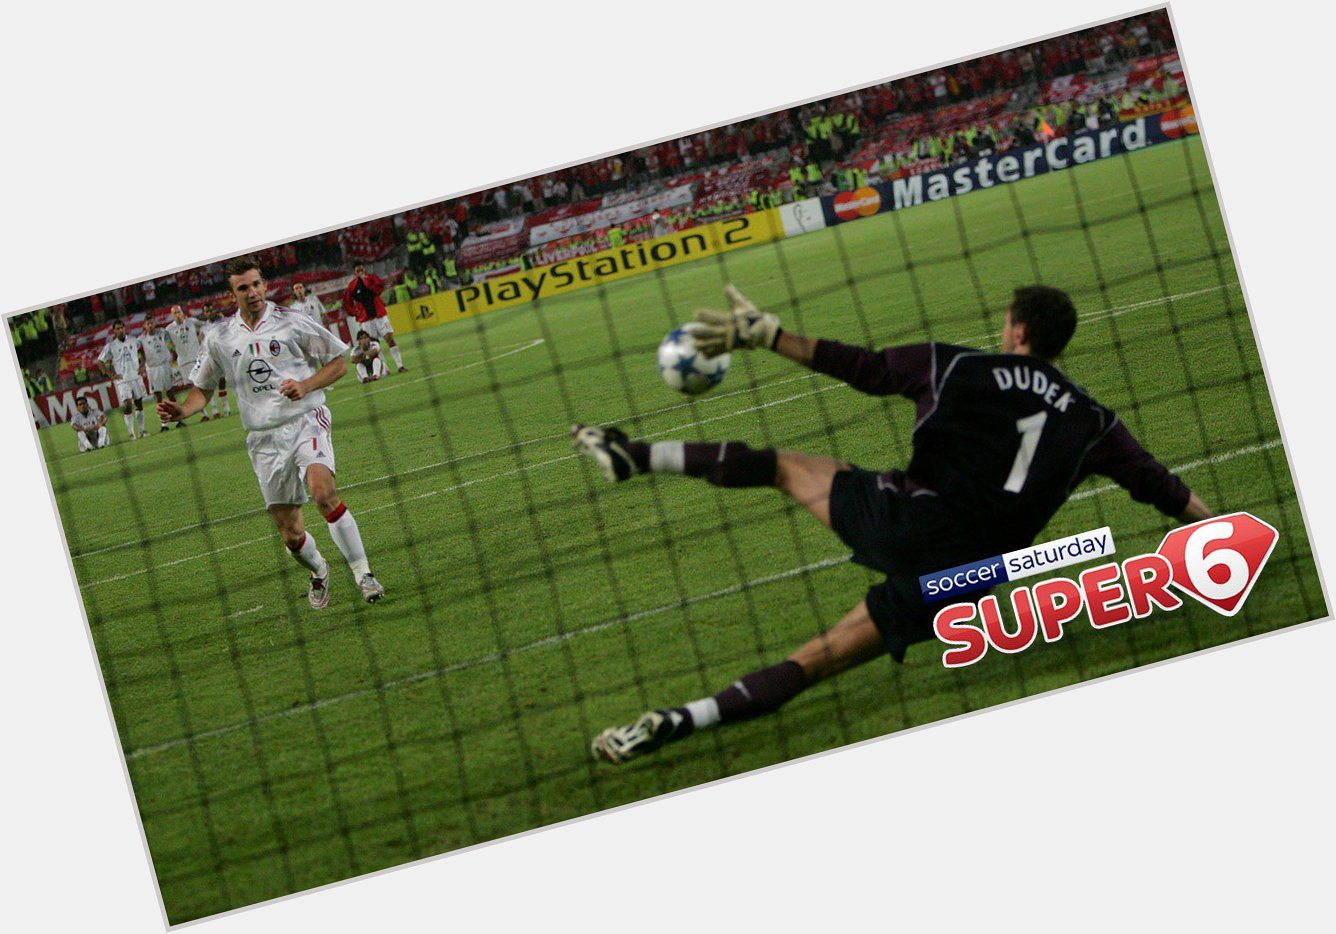  Happy Birthday Jerzy Dudek!  Forever a legend for this Champions League winning save. 